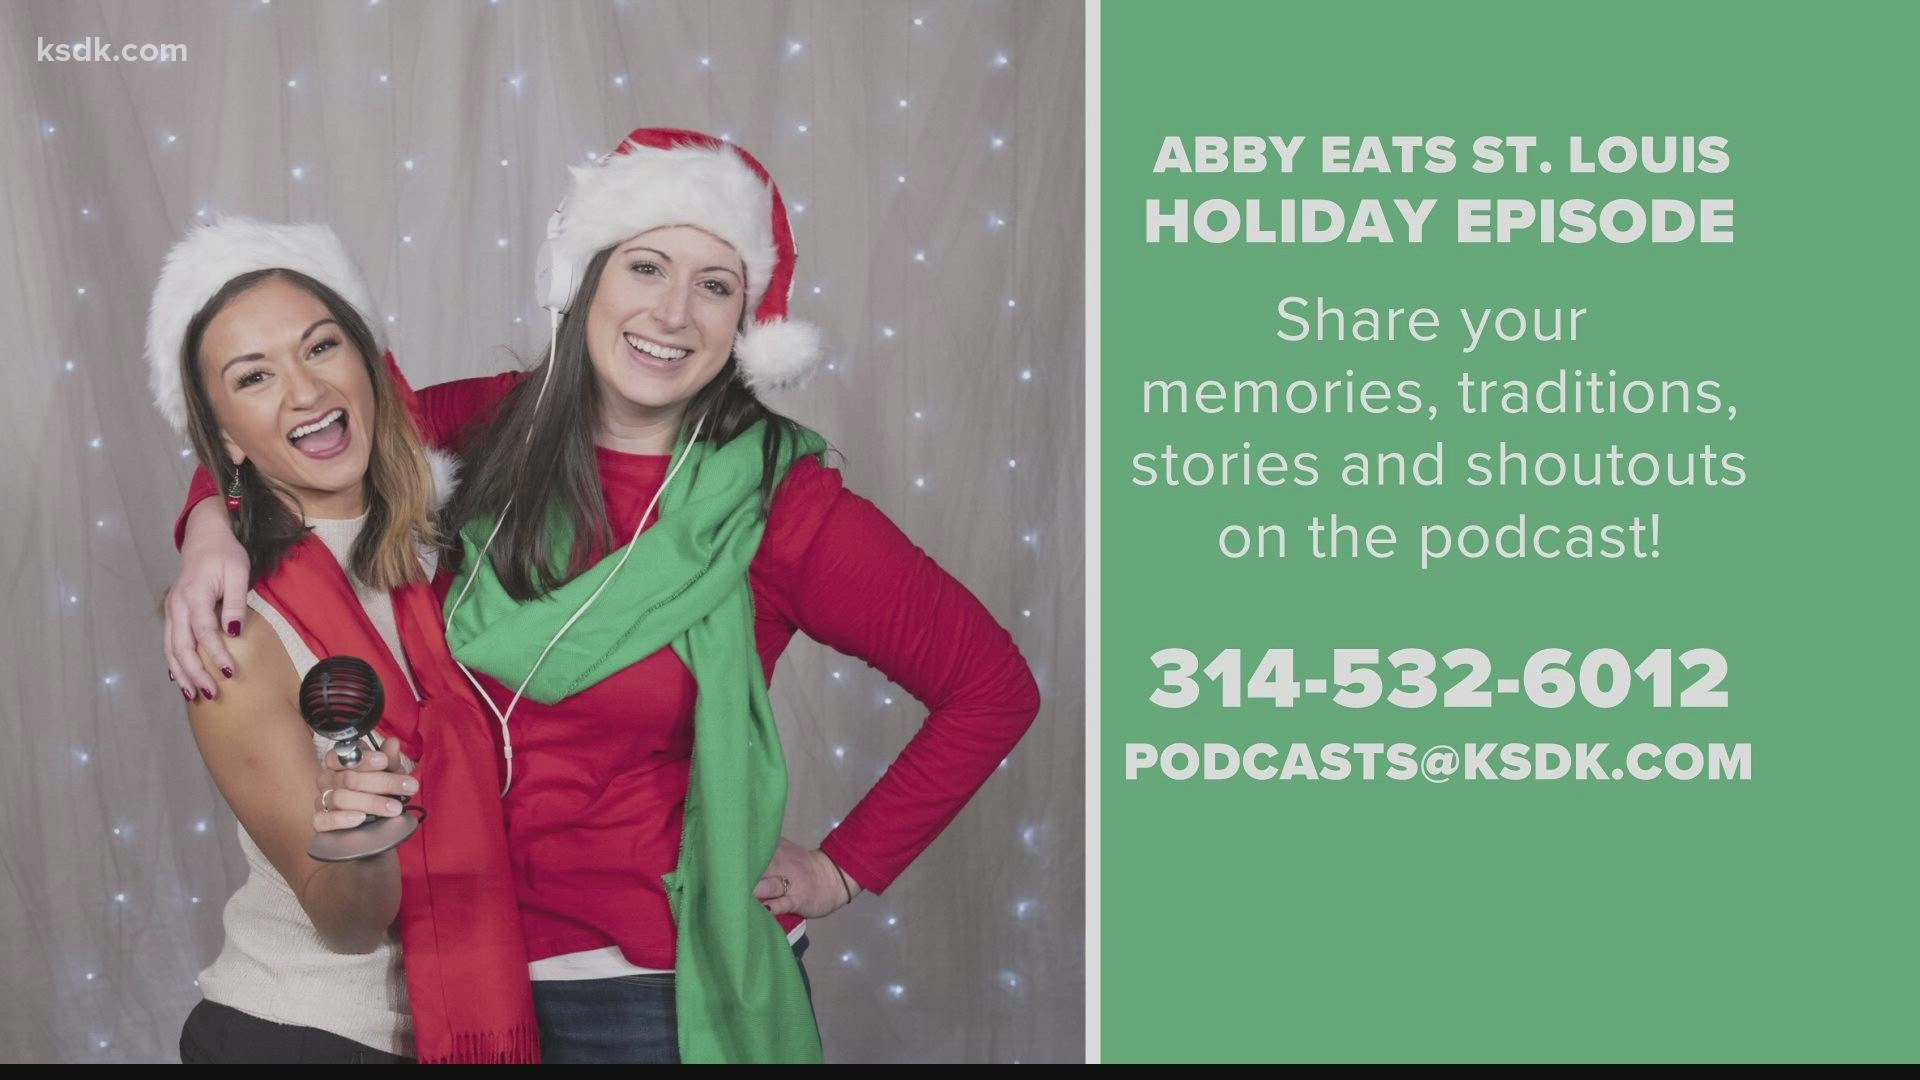 The Abby Eats St. Louis podcast team wants to share your stories on the upcoming holiday call-in episode. Call us at 314-532-6012 or email us at podcasts@ksdk.com.